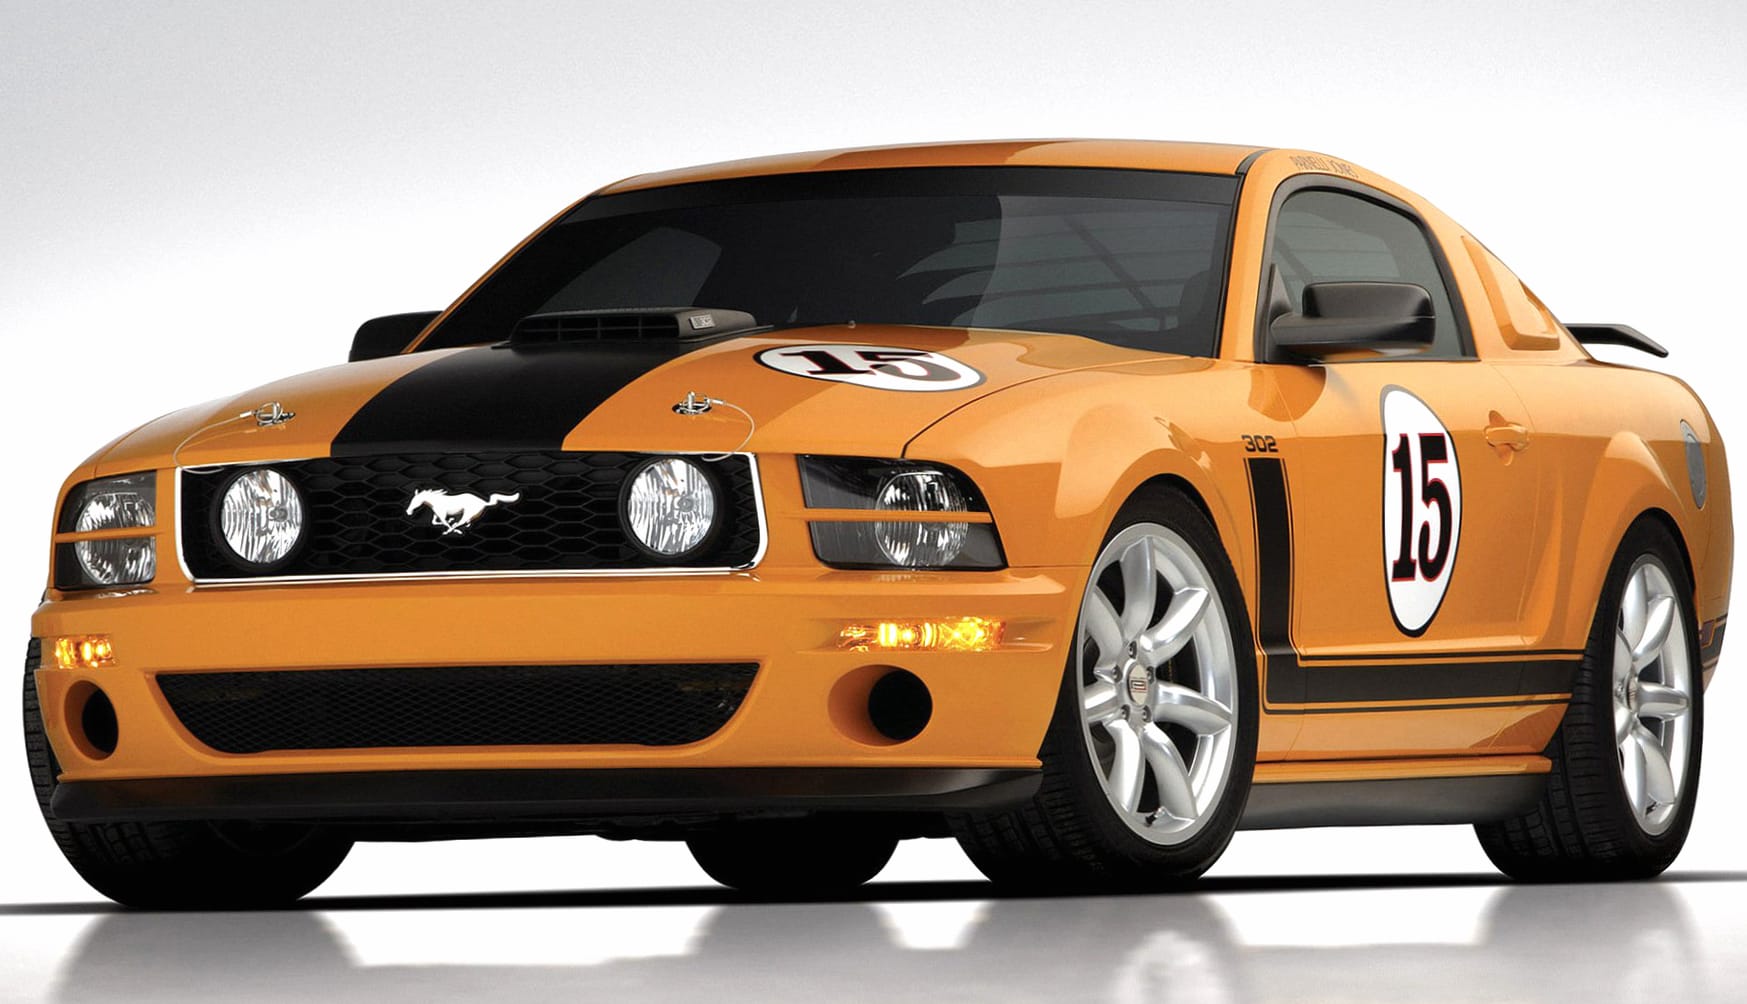 Ford Mustang Saleen S302 Parnelli Jones Limited Edition wallpapers HD quality